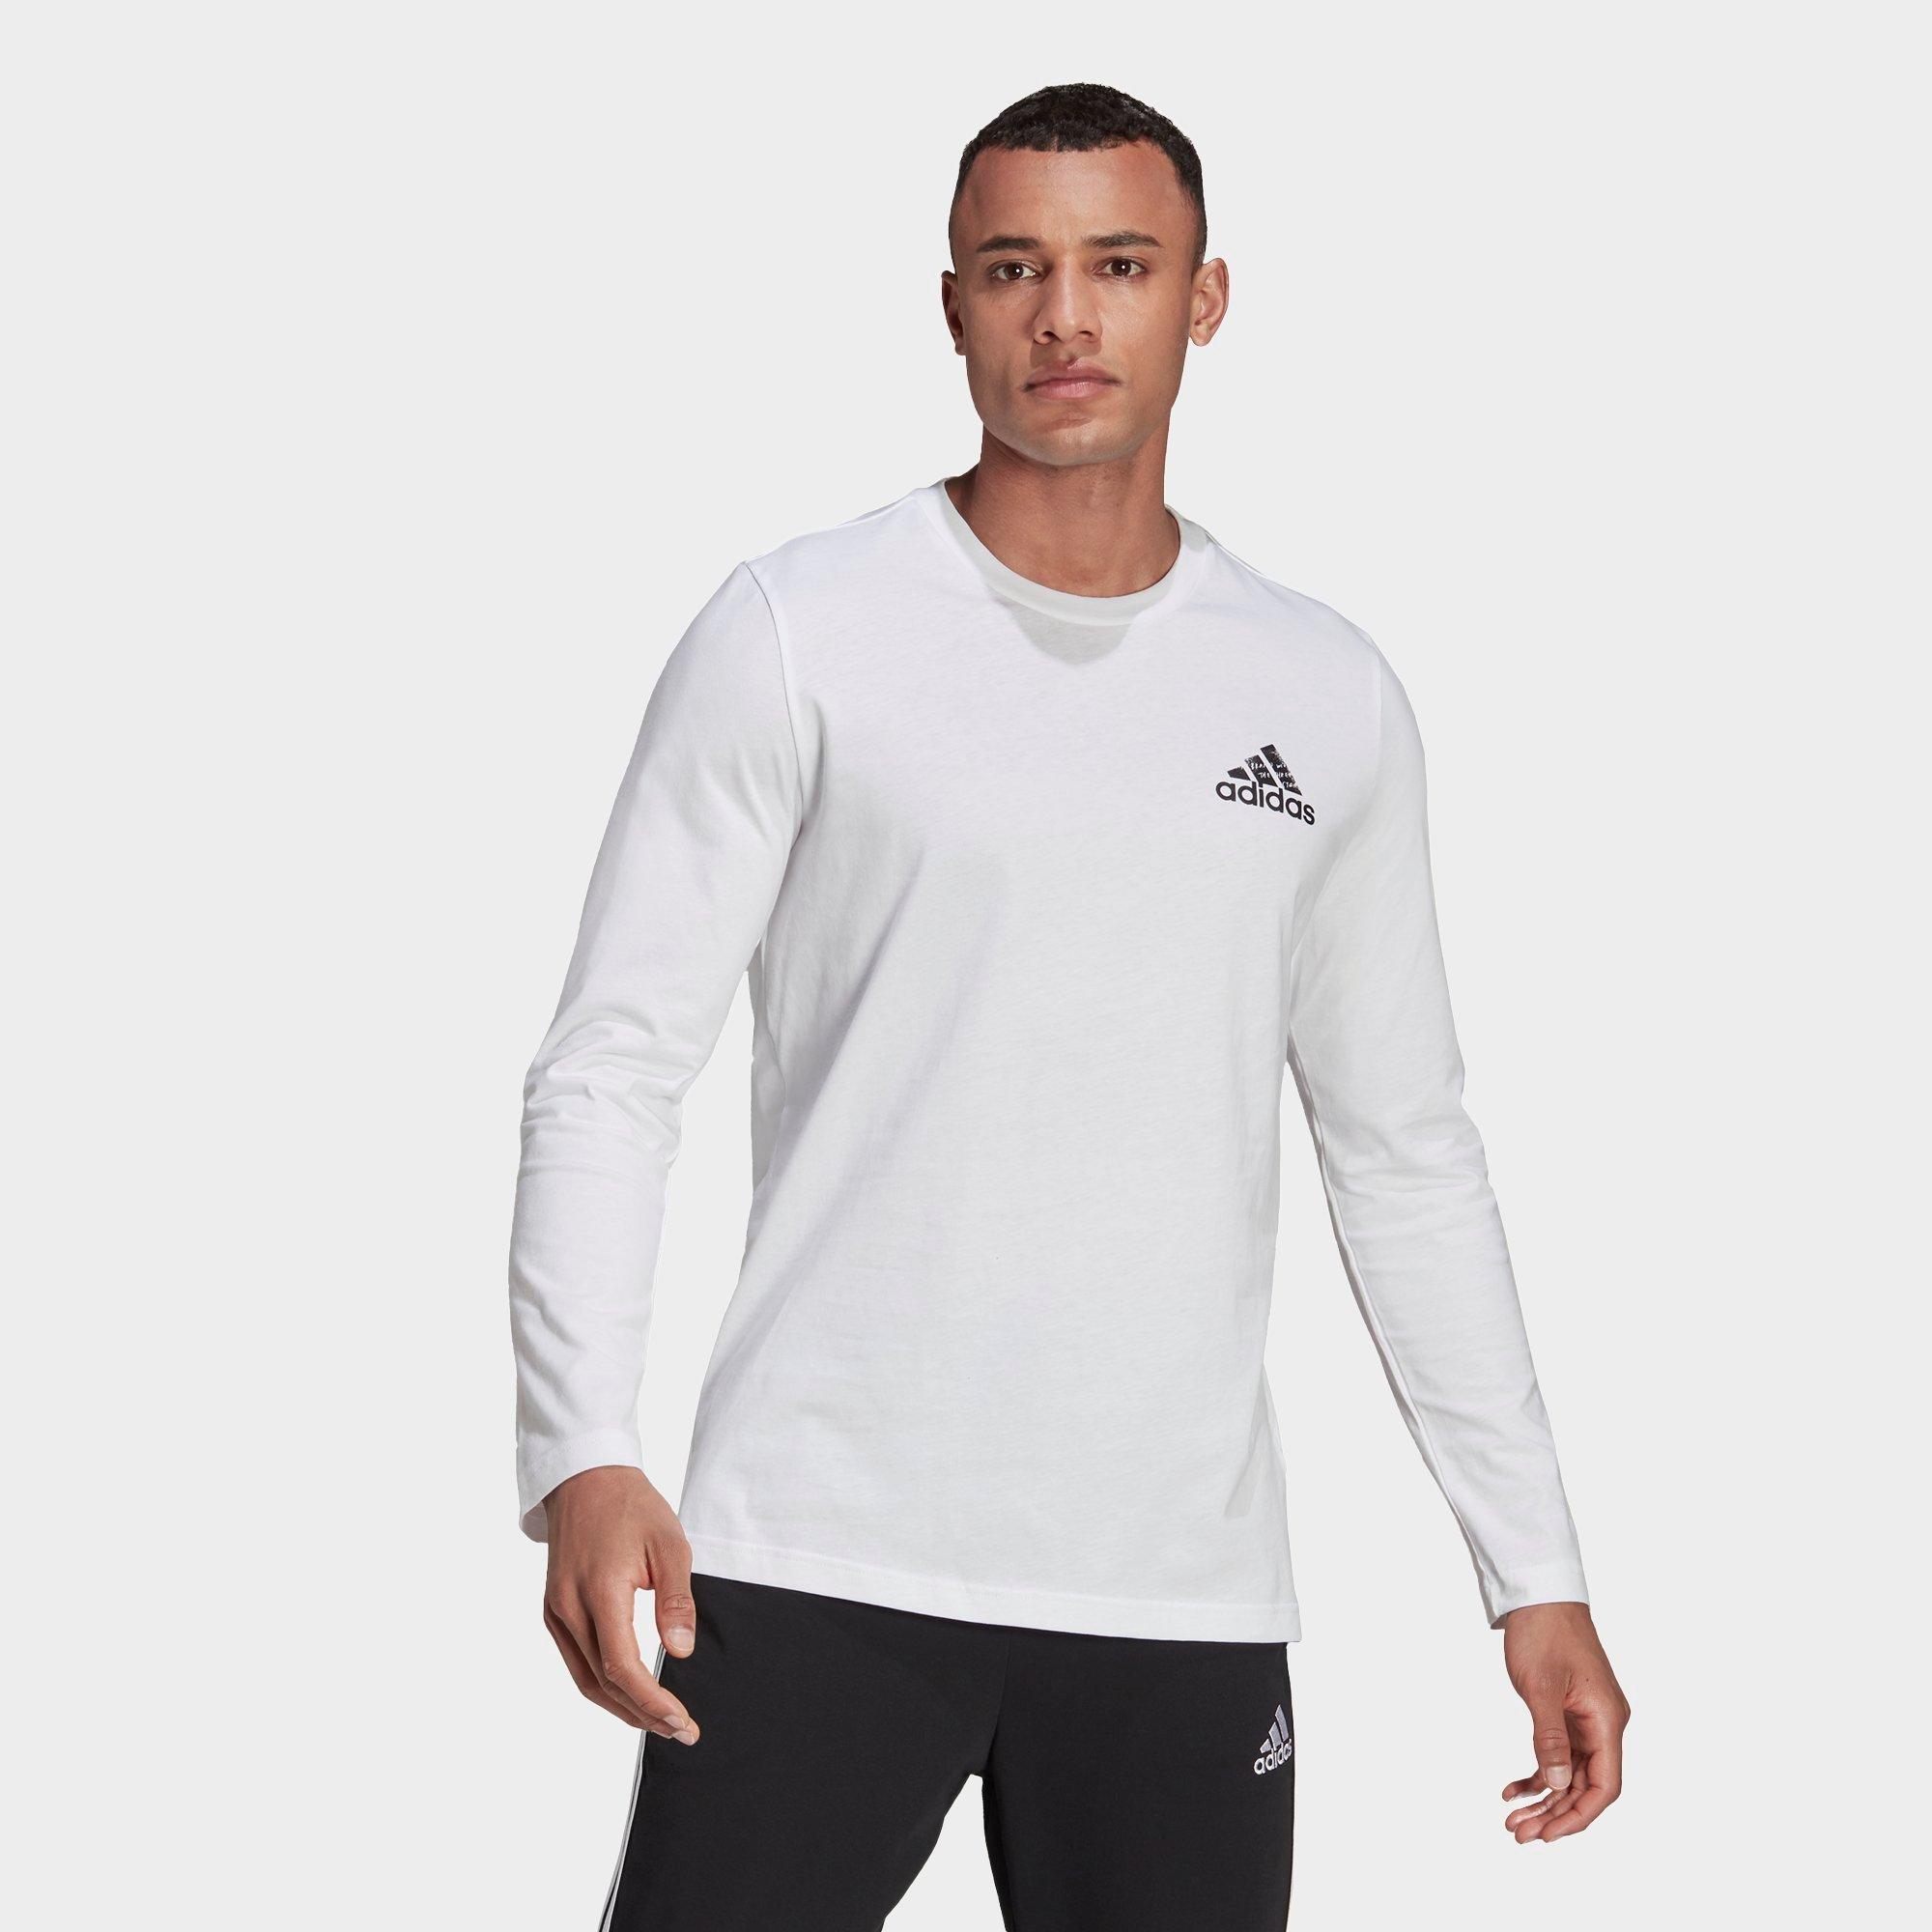 Get the Adidas Men's Spray Graphic Long-Sleeve T-Shirt in White ...